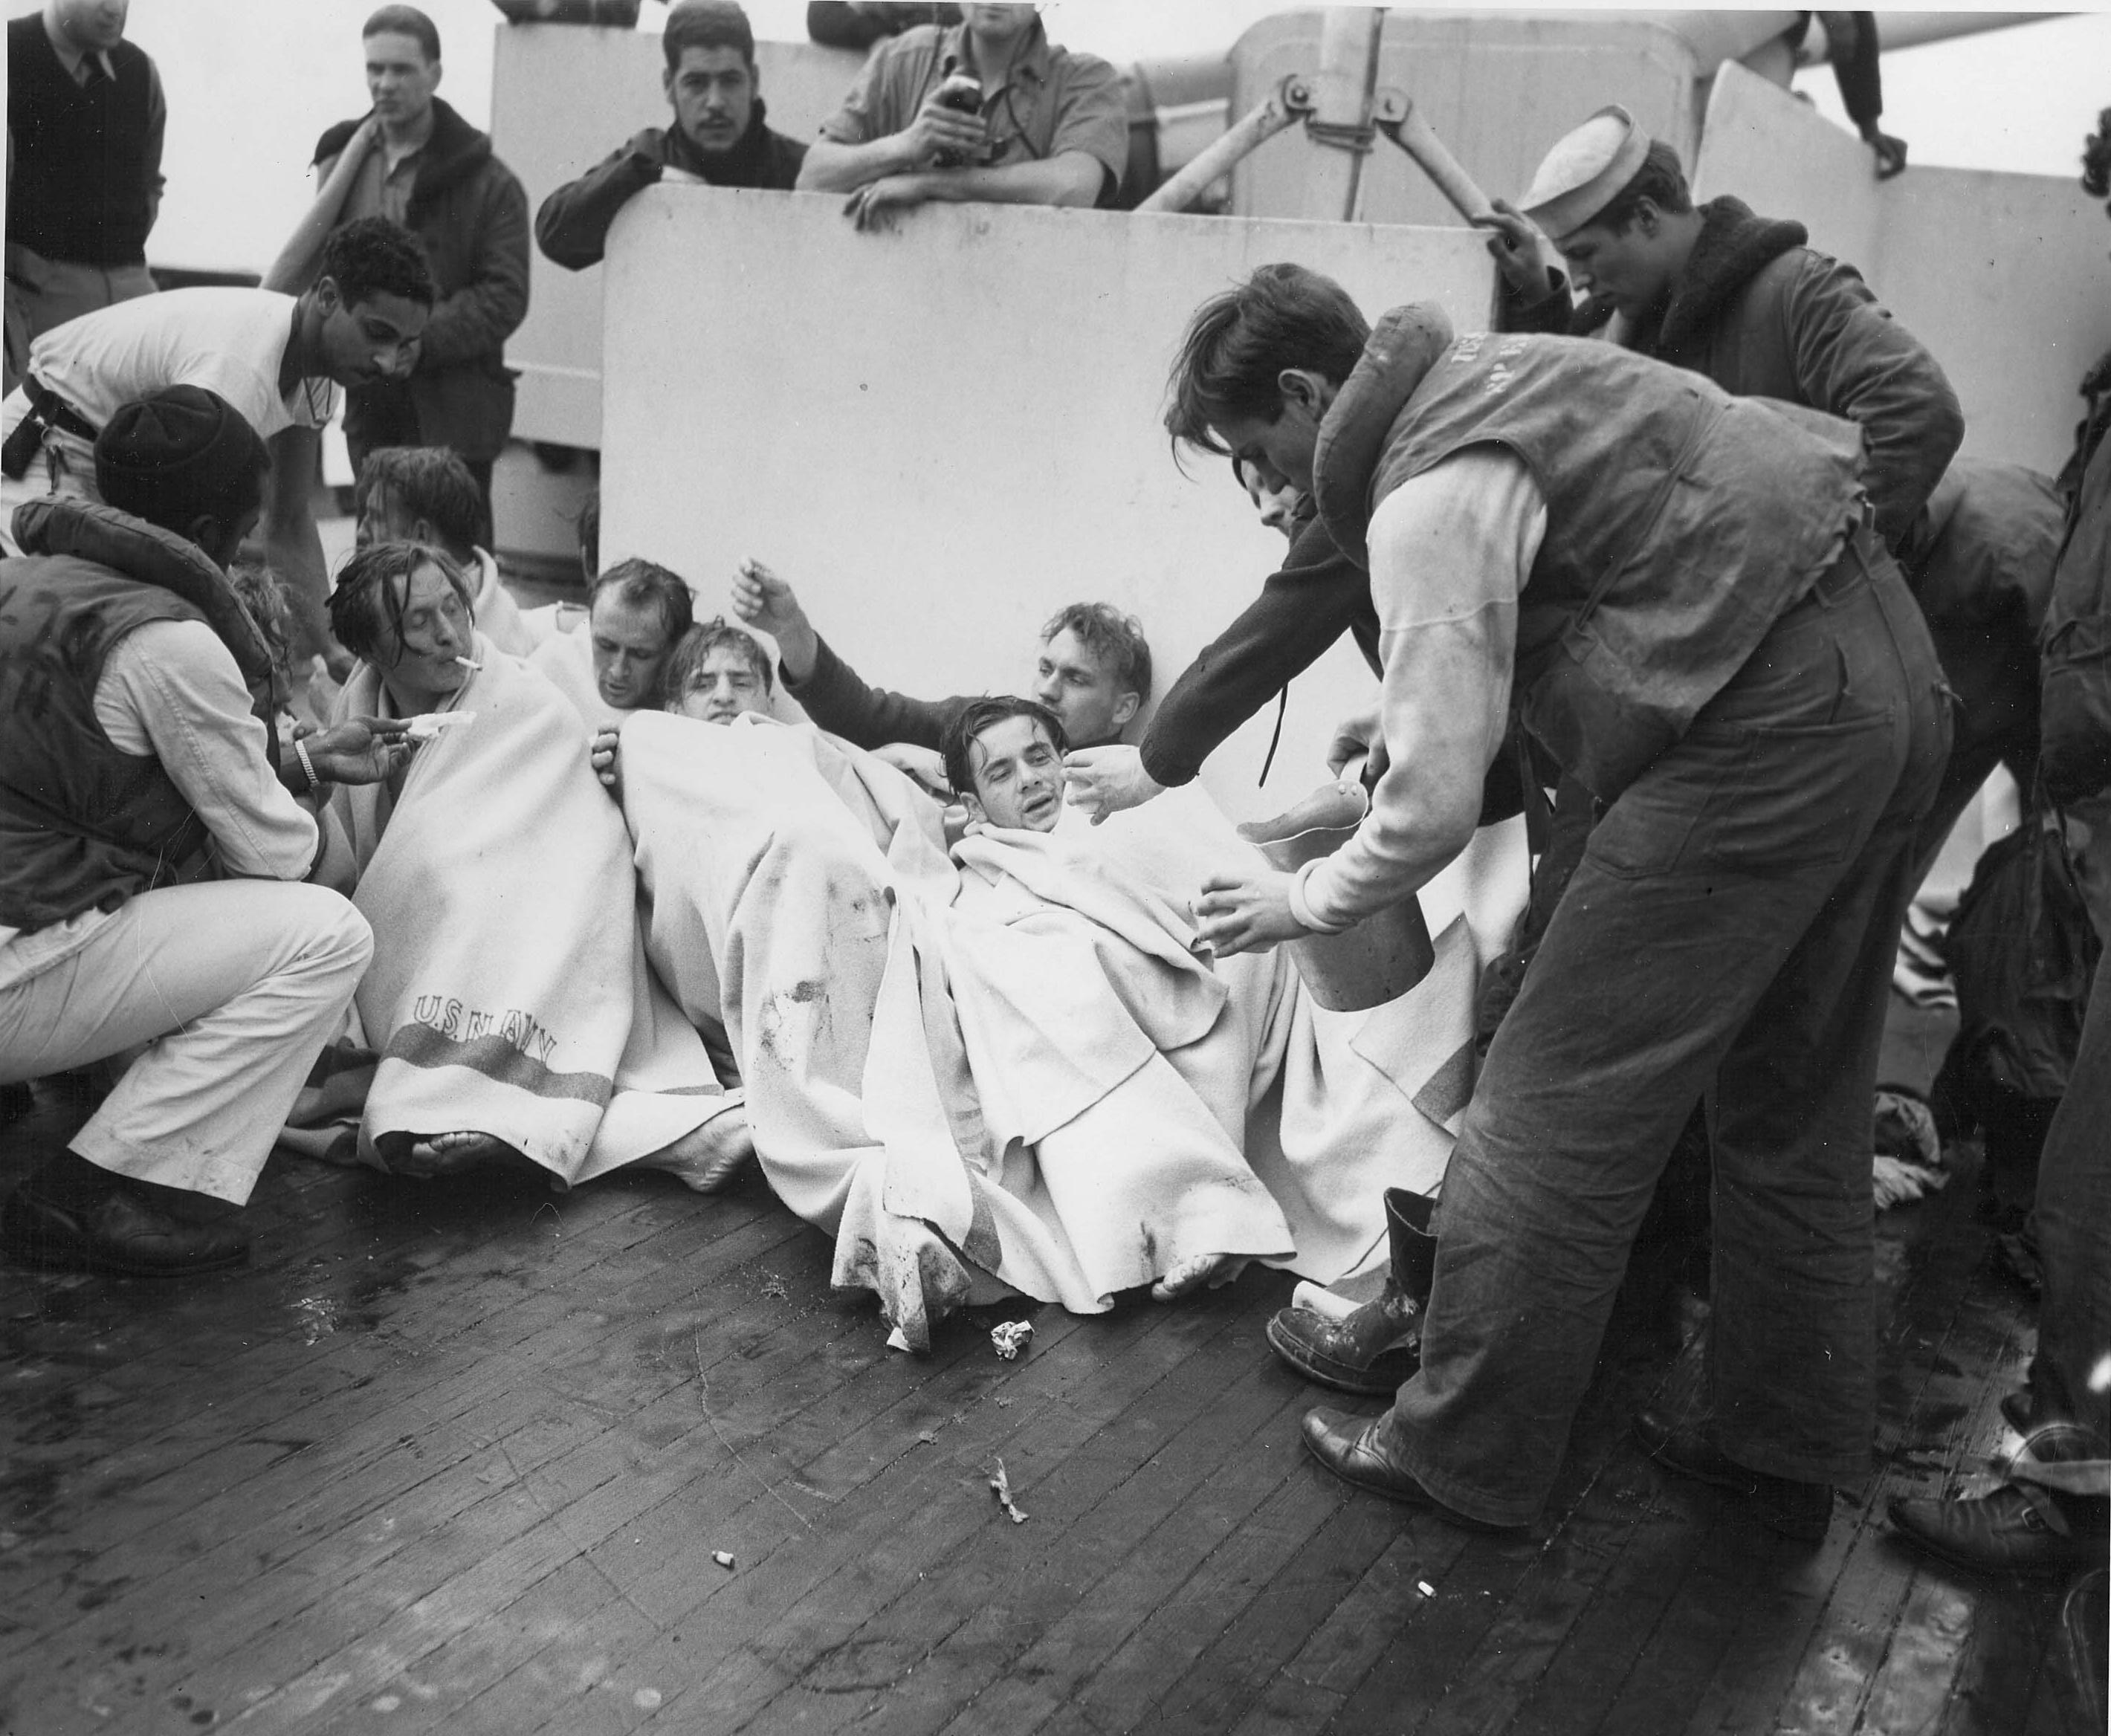 Crew of USS Spencer cared for rescued U-175 sailors, North Atlantic, 500 nautical miles WSW of Ireland, 17 Apr 1943, photo 2 of 2